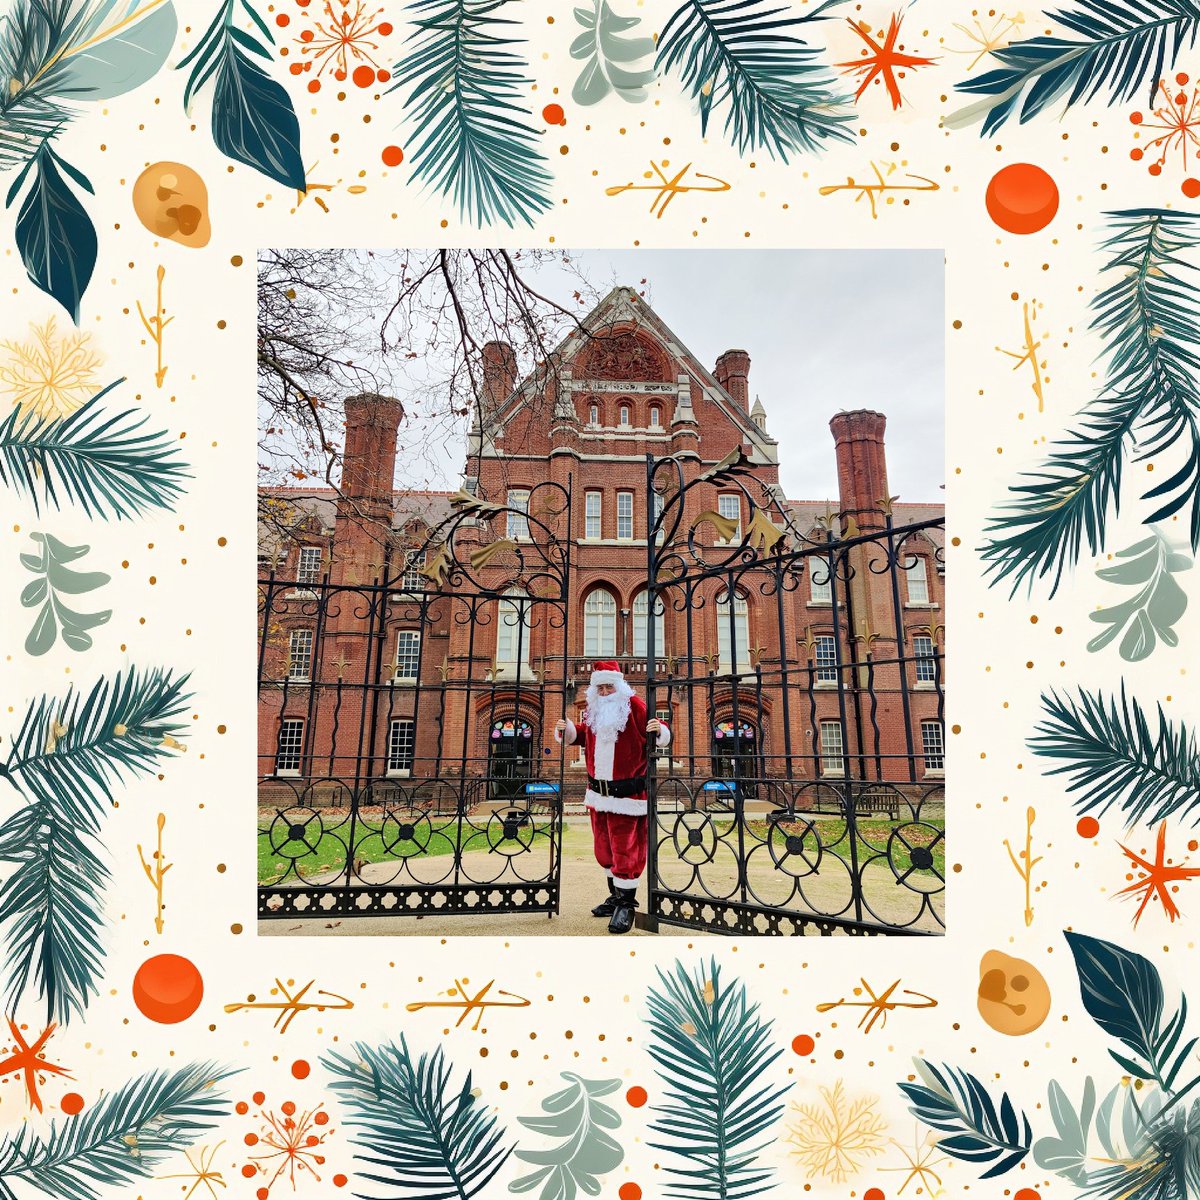 For #EventAdvent Day 17 it's off to @PortsCityMuseum to see someone very special... 🎅 Meet Santa in his grotto and get a special personalised gift to take home. The museum also hosts an interactive trail, panto dress up and Victorian games. Details: visitportsmouth.co.uk/whats-on/meet-…